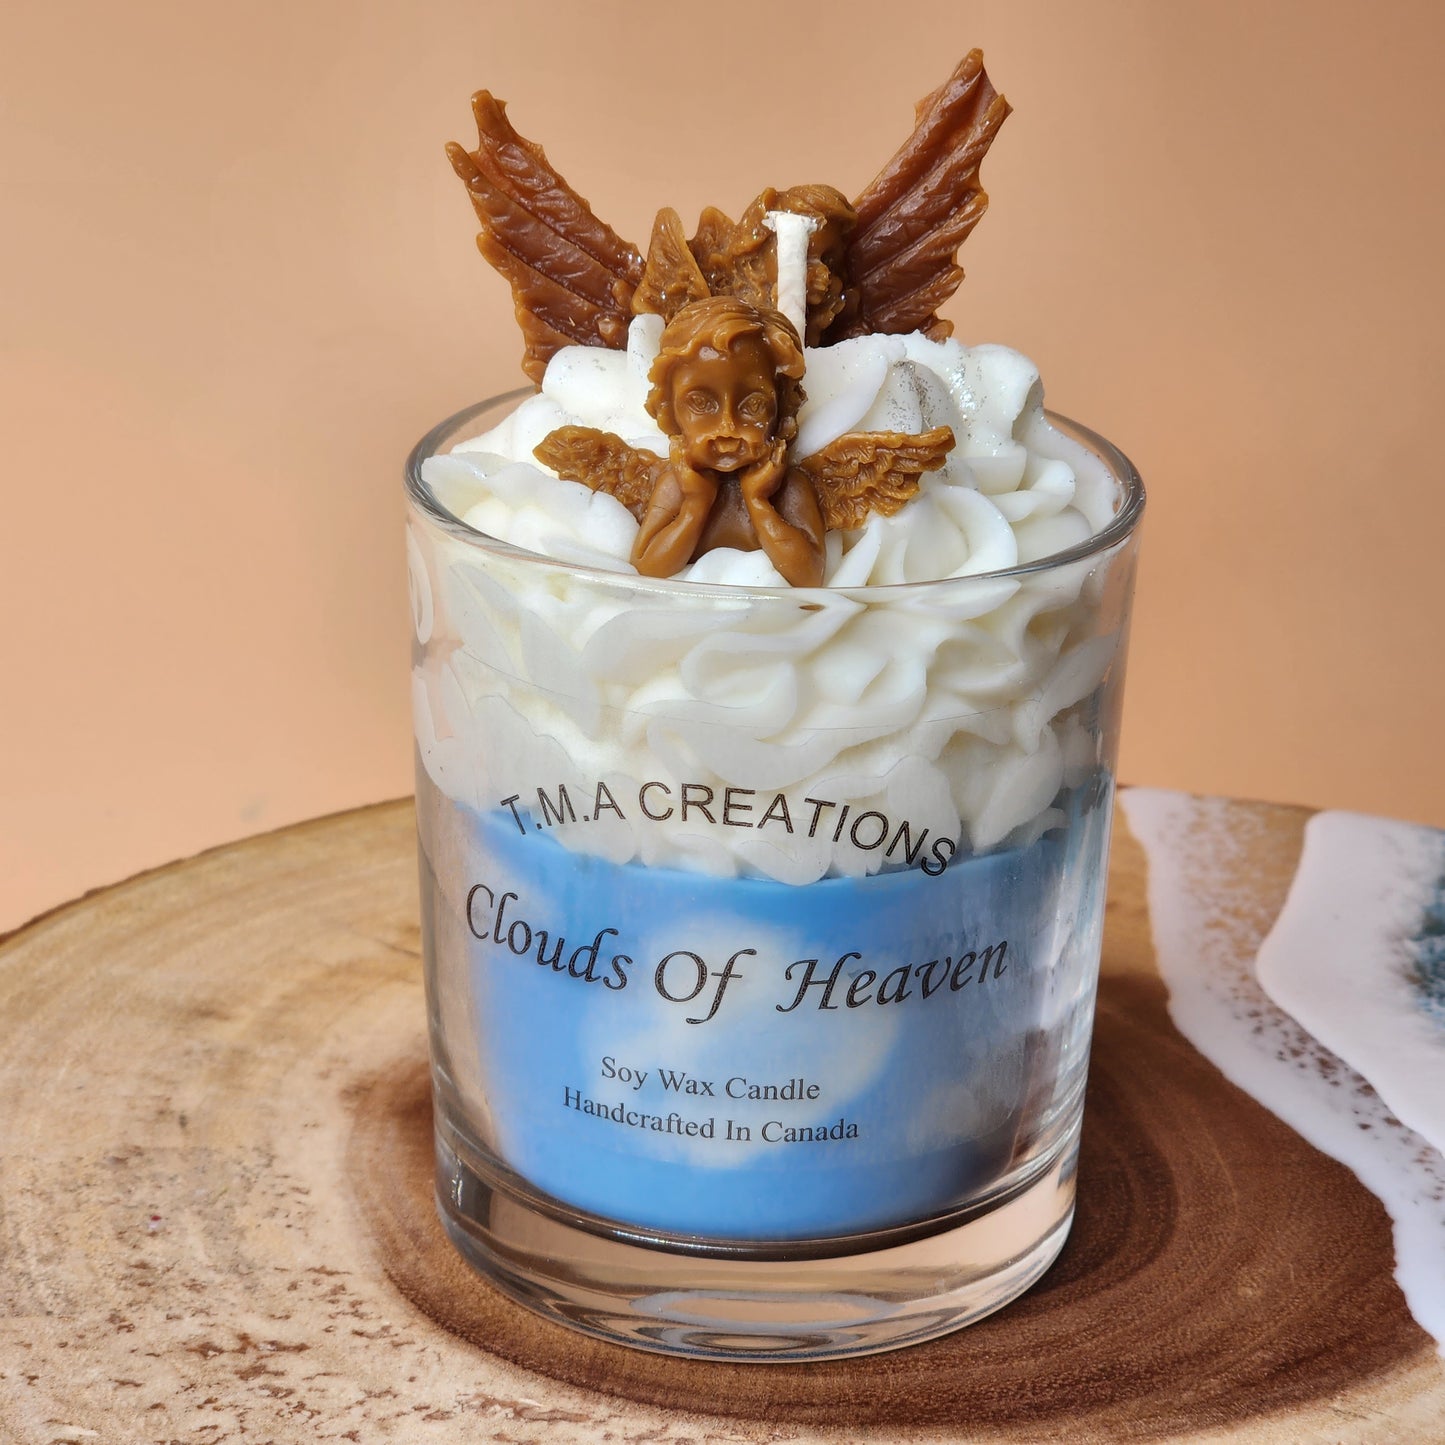 "Clouds Of Heaven" Candle